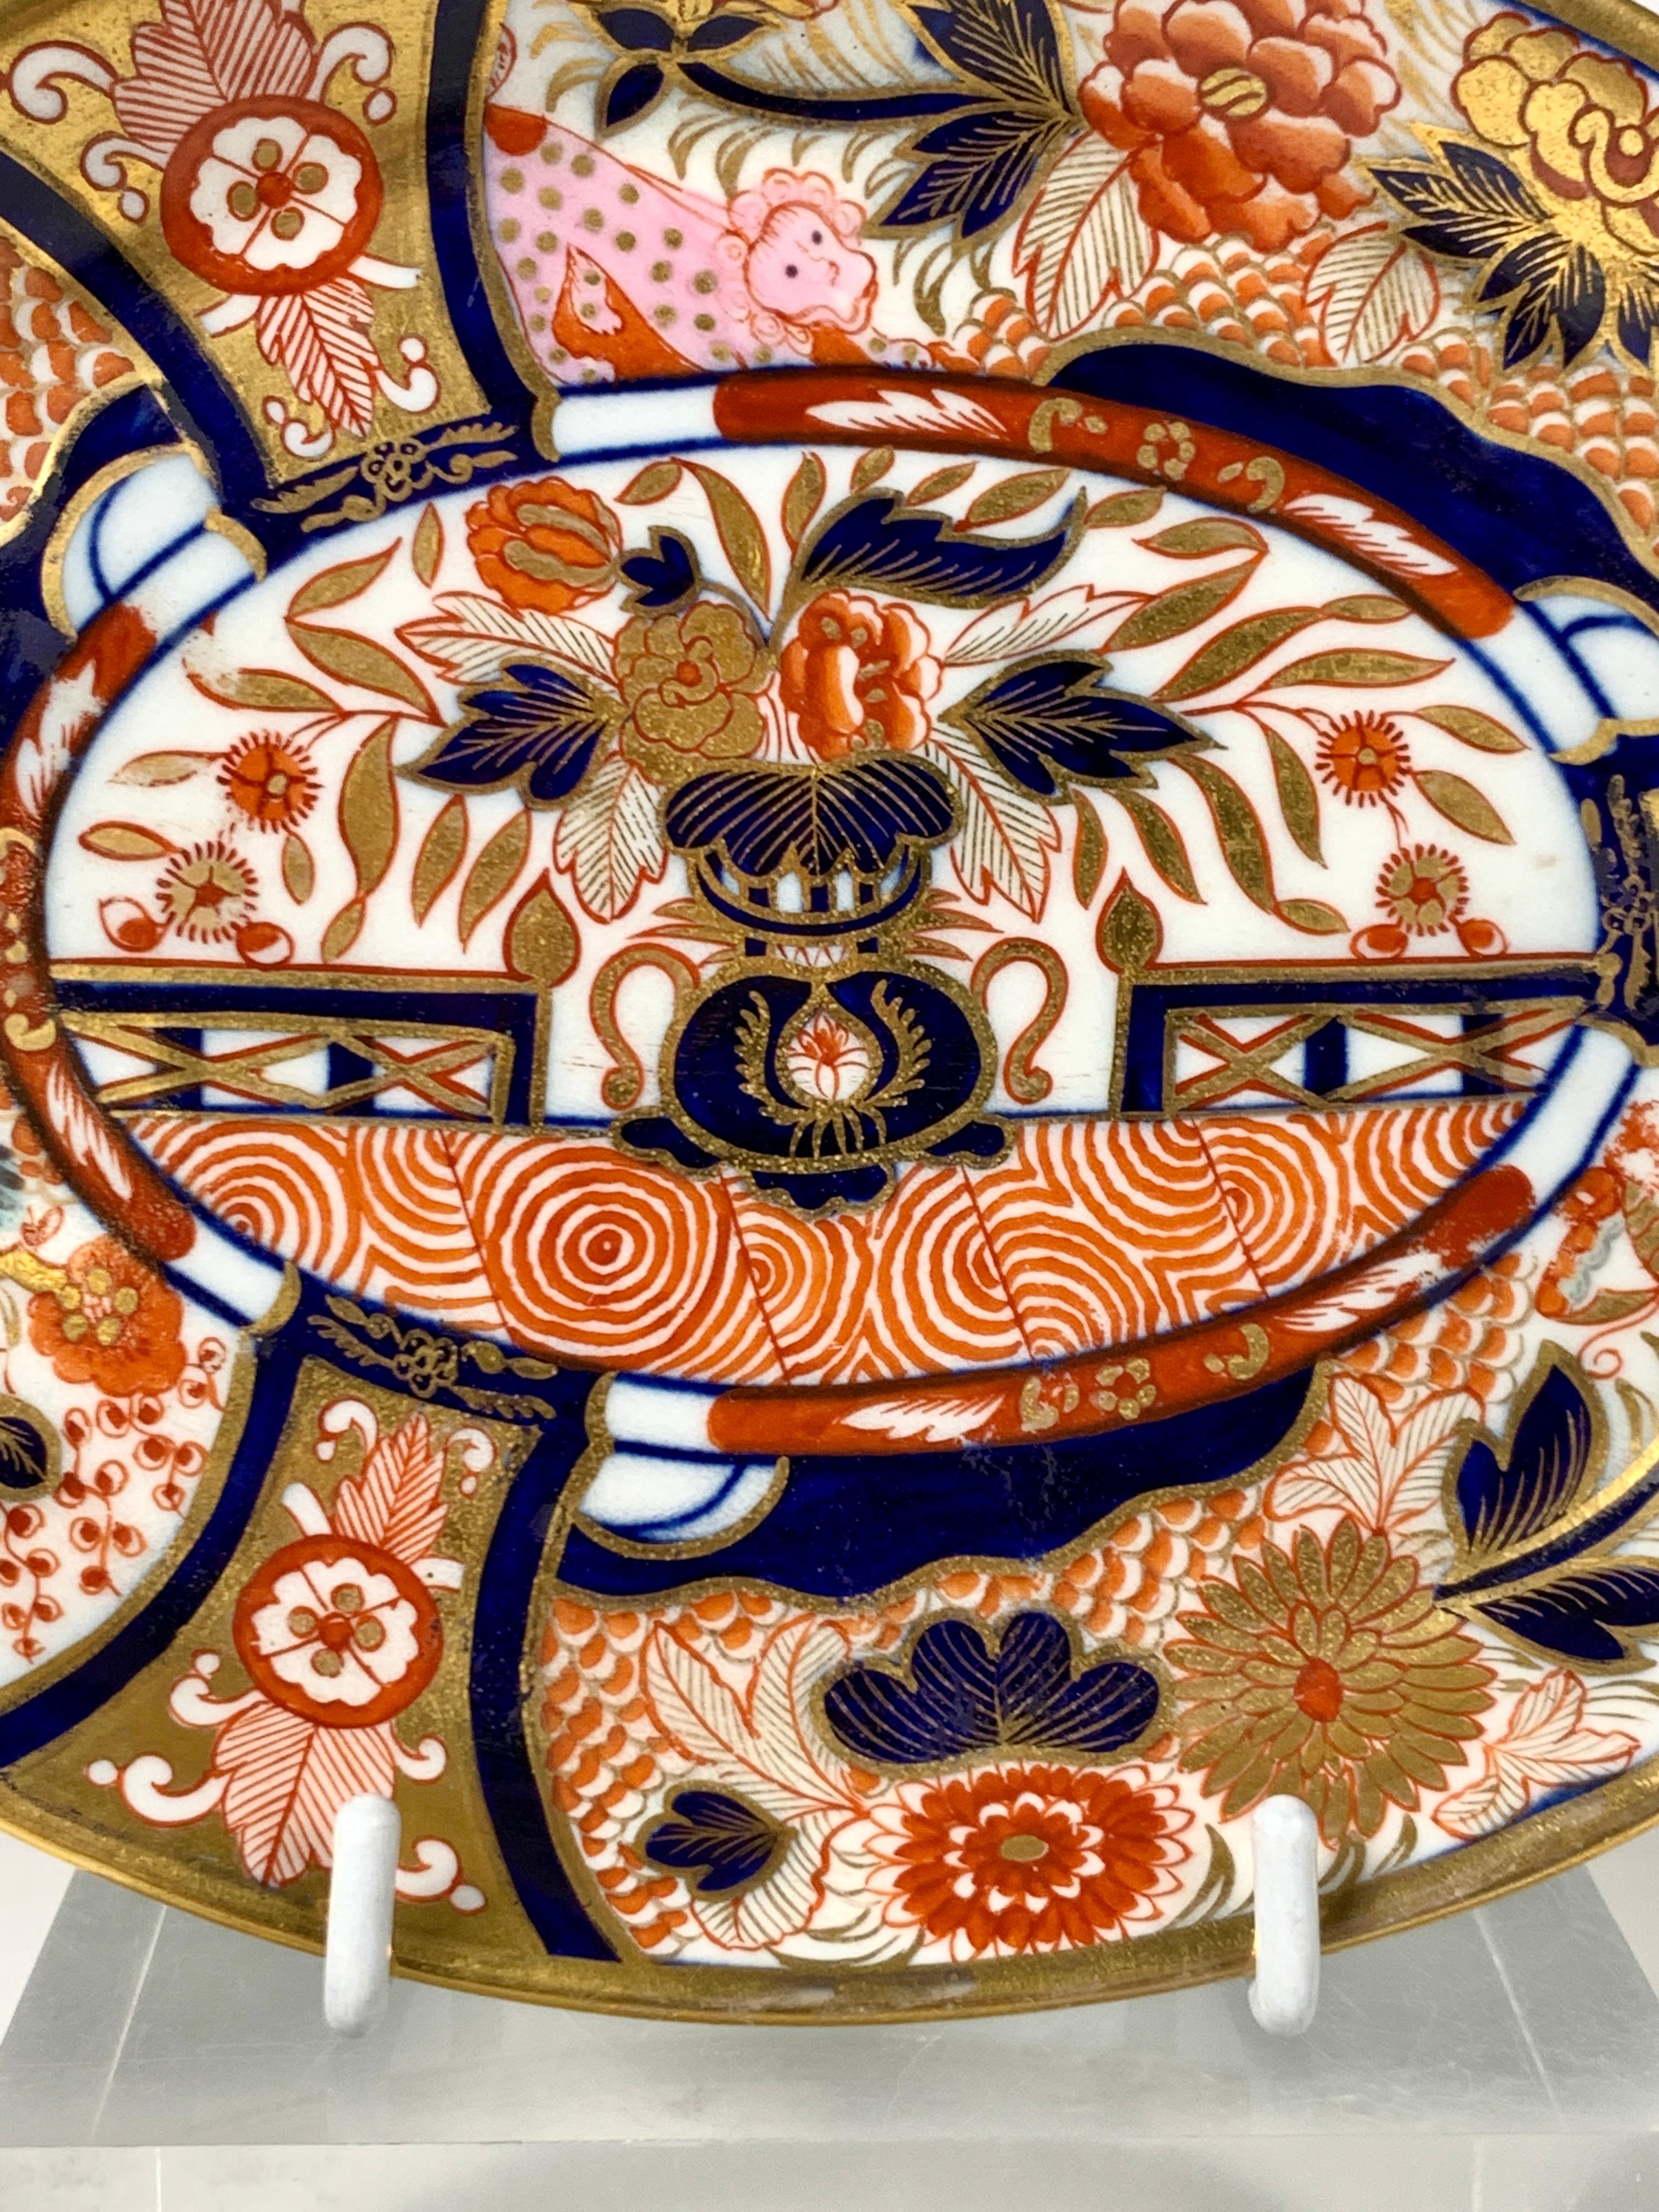 Why we love it: The intensity of the Imari colors and the fabulous pink spotted lion. 
This Coalport Admiral Nelson oval dish was hand-painted in England during the Regency period circa 1810. It is decorated in a traditional, vibrant Imari palette: